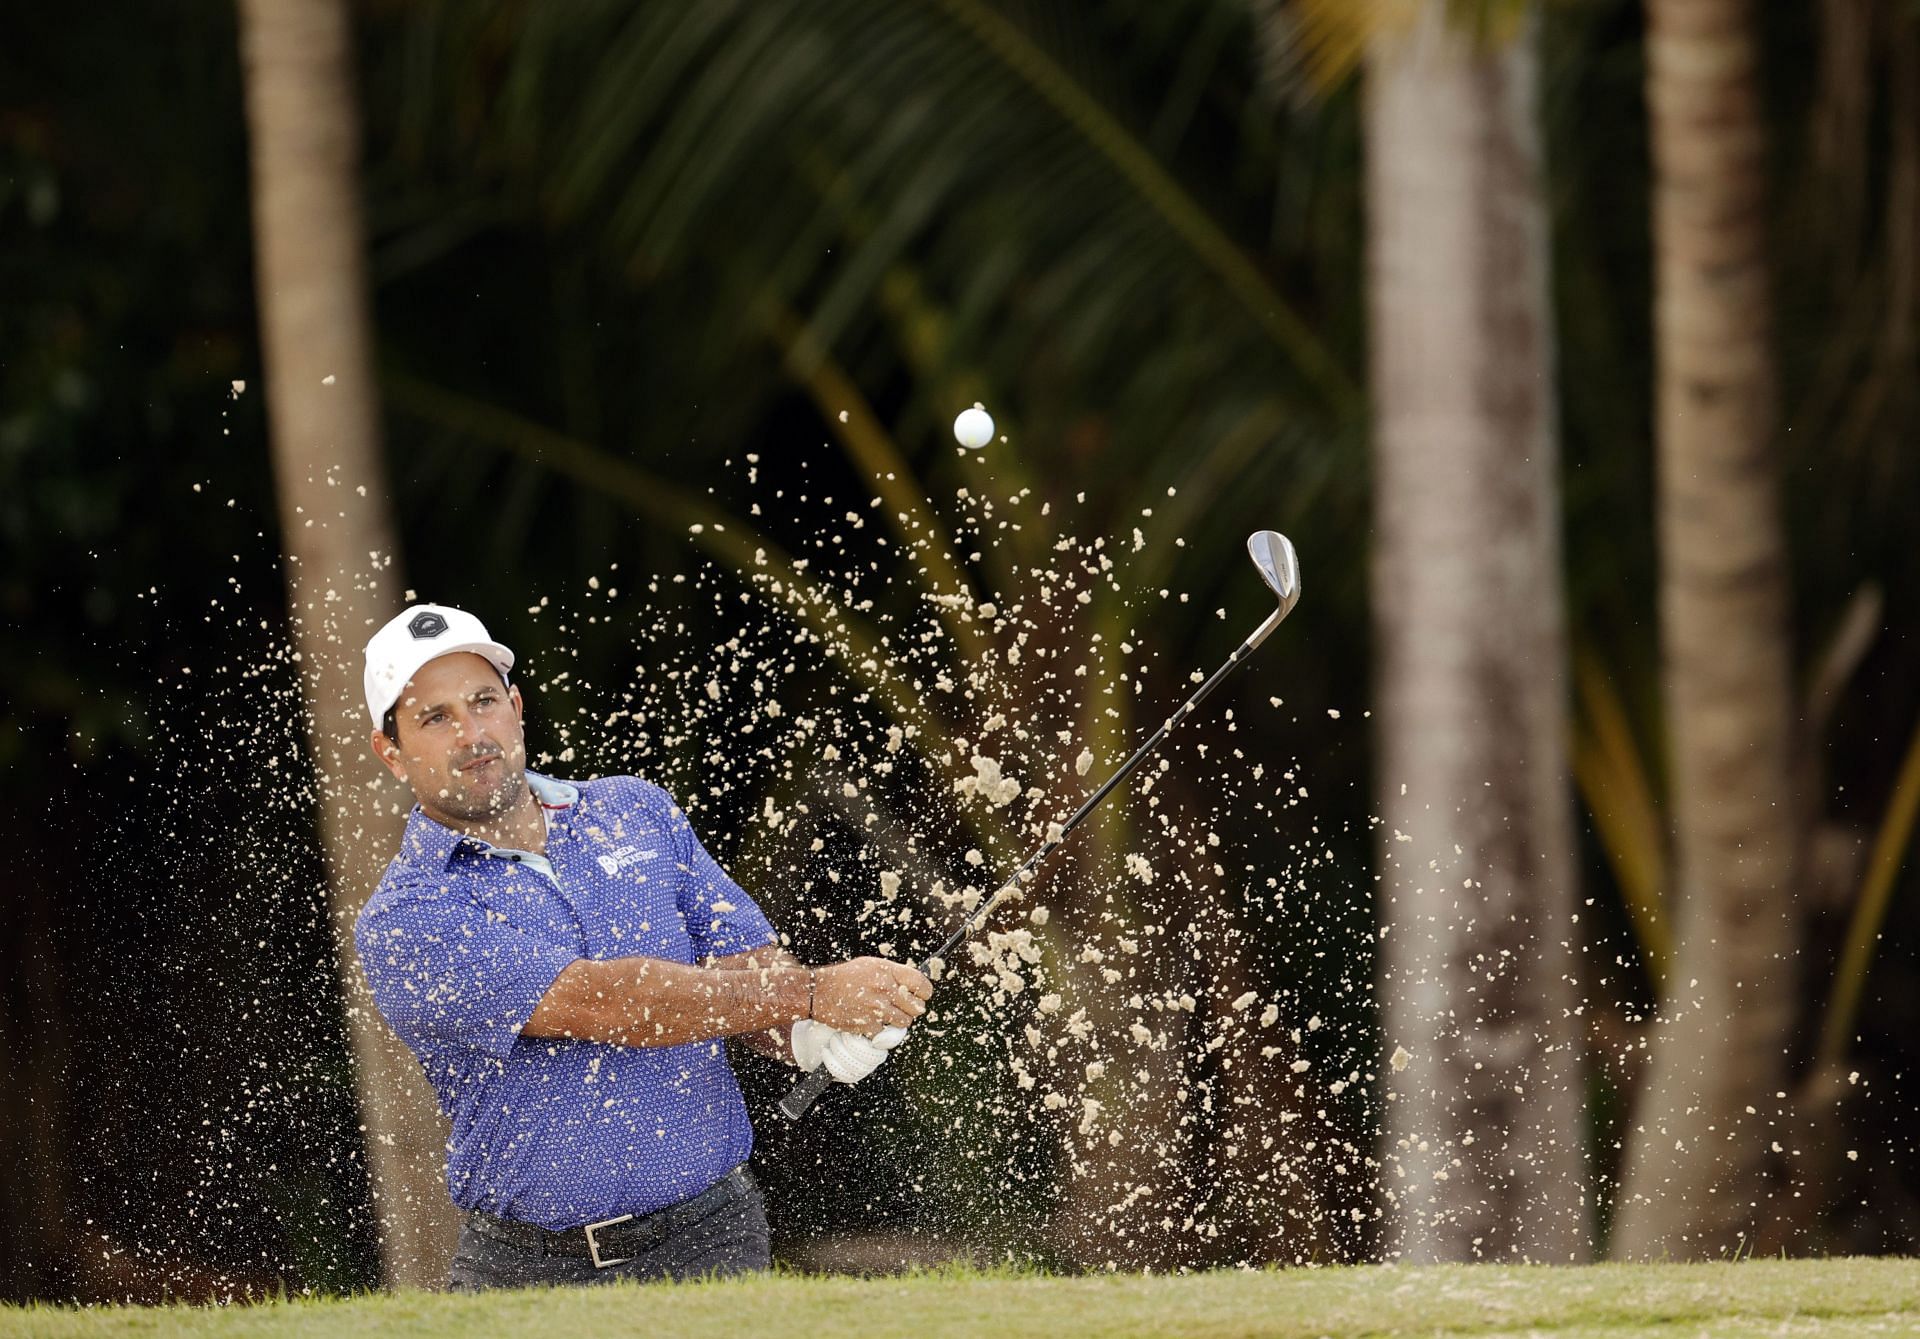 2023 Mexico Open at Vidanta How to watch, TV schedule, streaming, golf coverage, radio and more